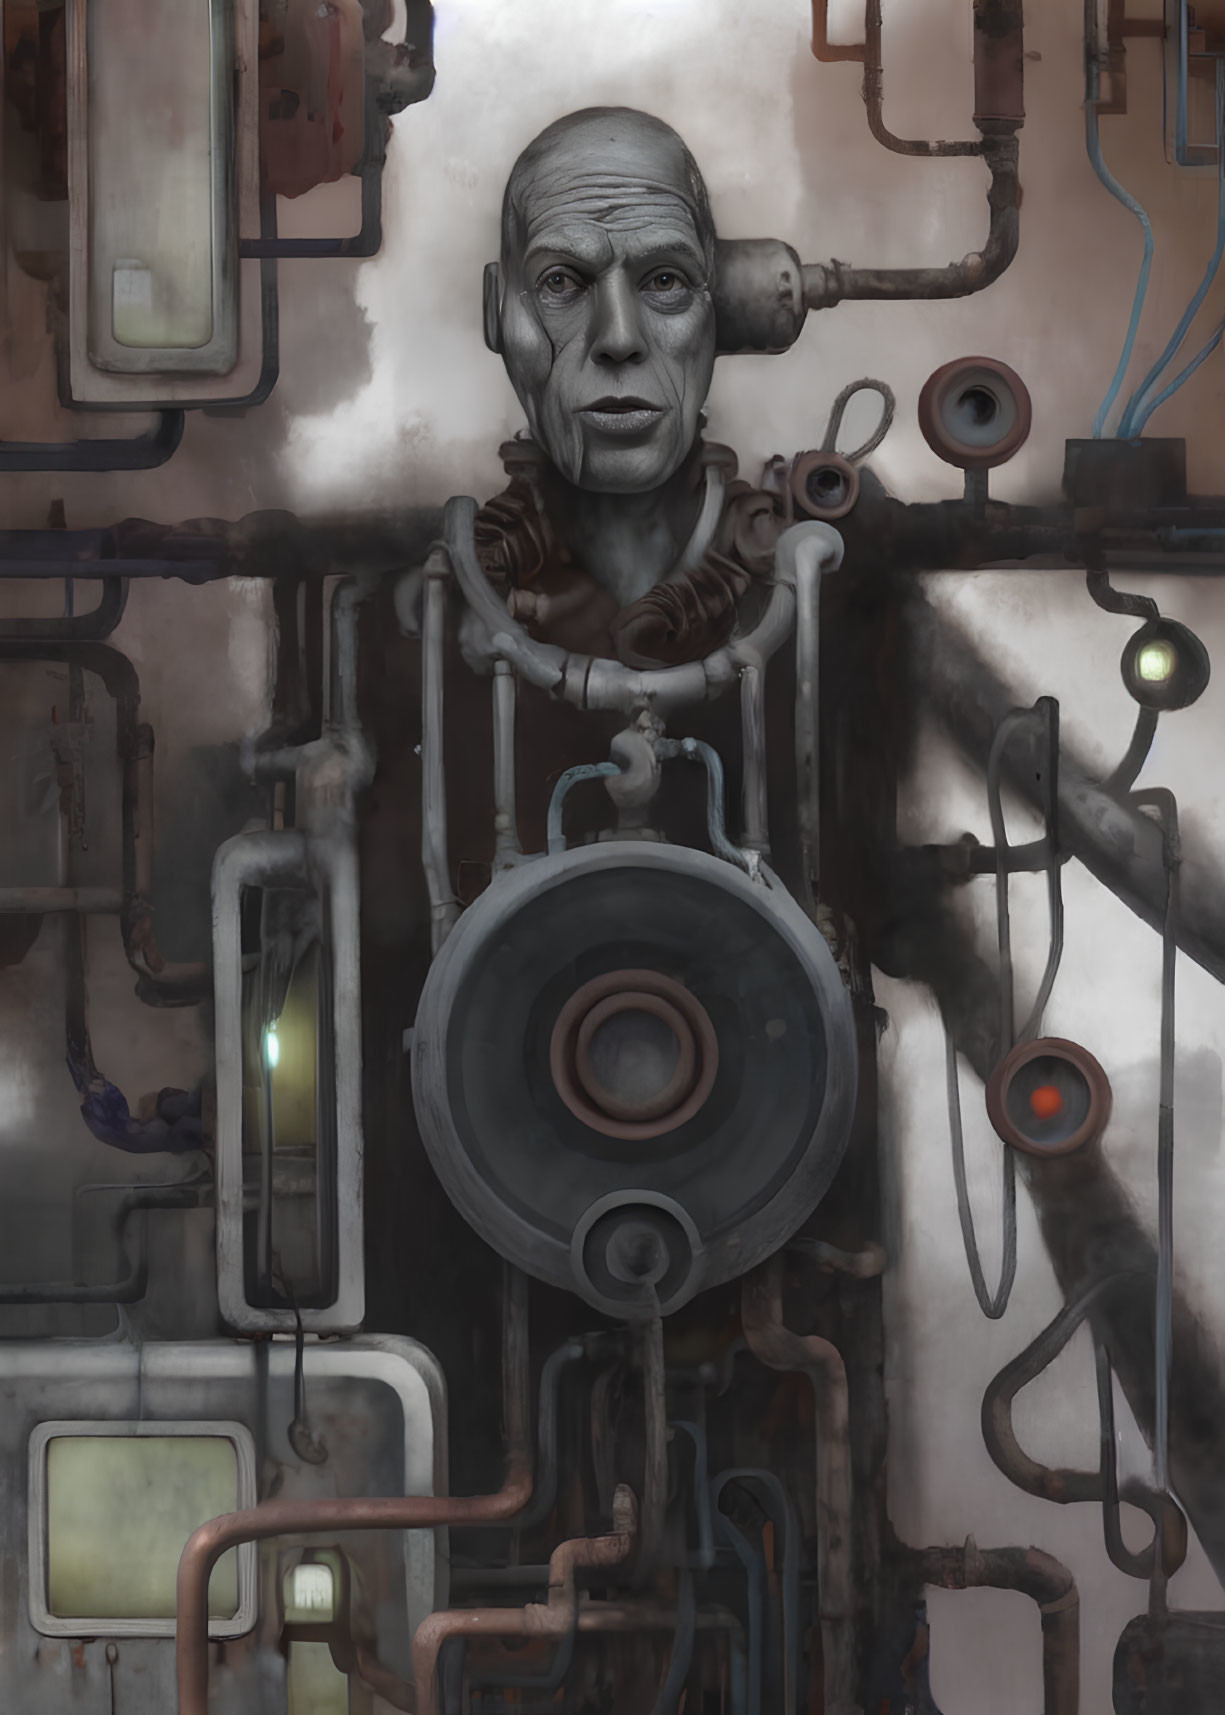 Elderly cyborg with weathered skin and industrial machinery integration